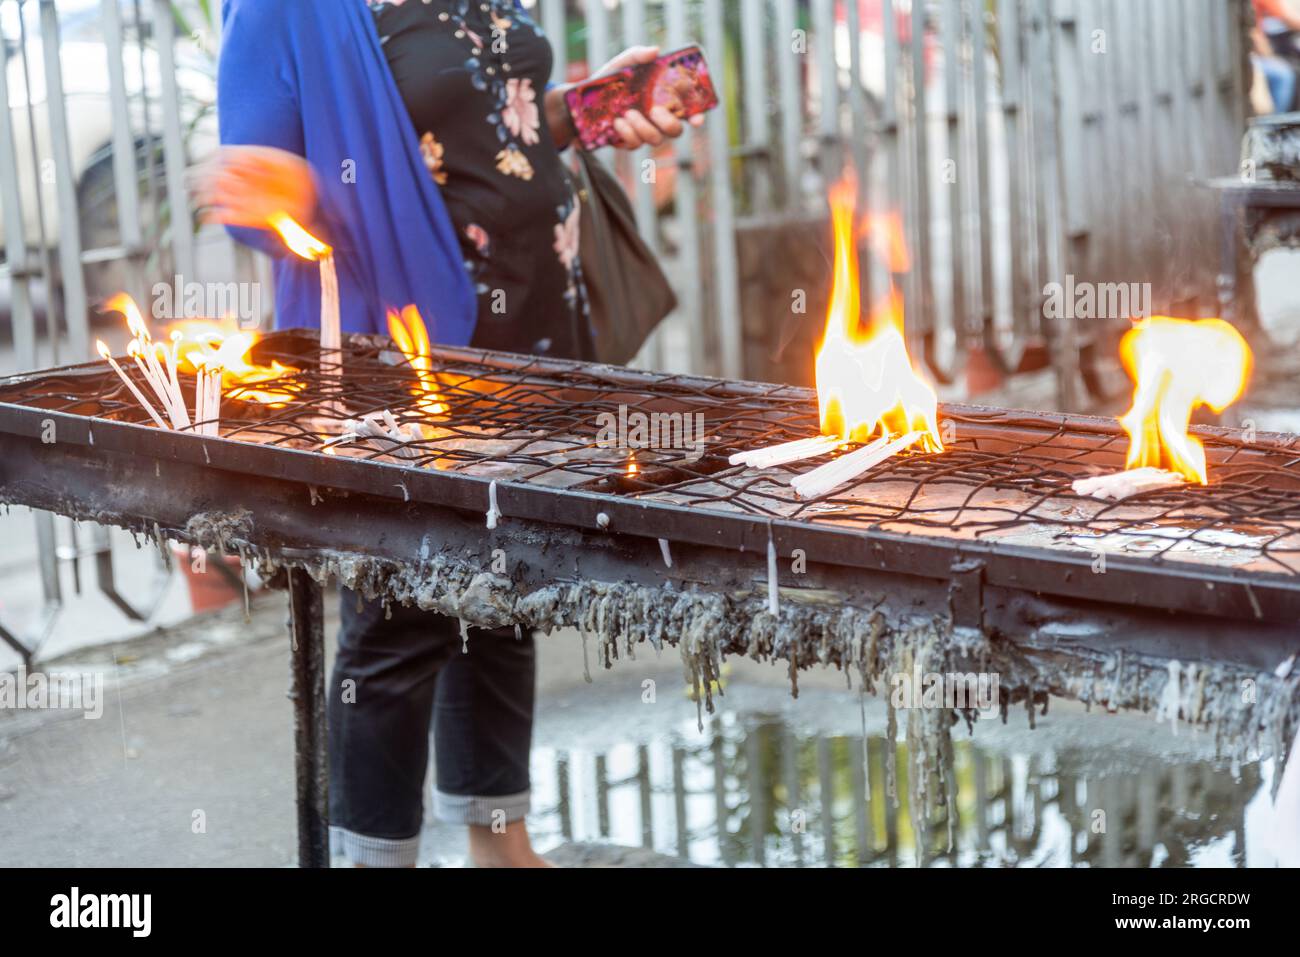 Large bright flames from burning candles,molten candle wax dripping from metal tray as people place and position them carefully as they pray to Jesus Stock Photo